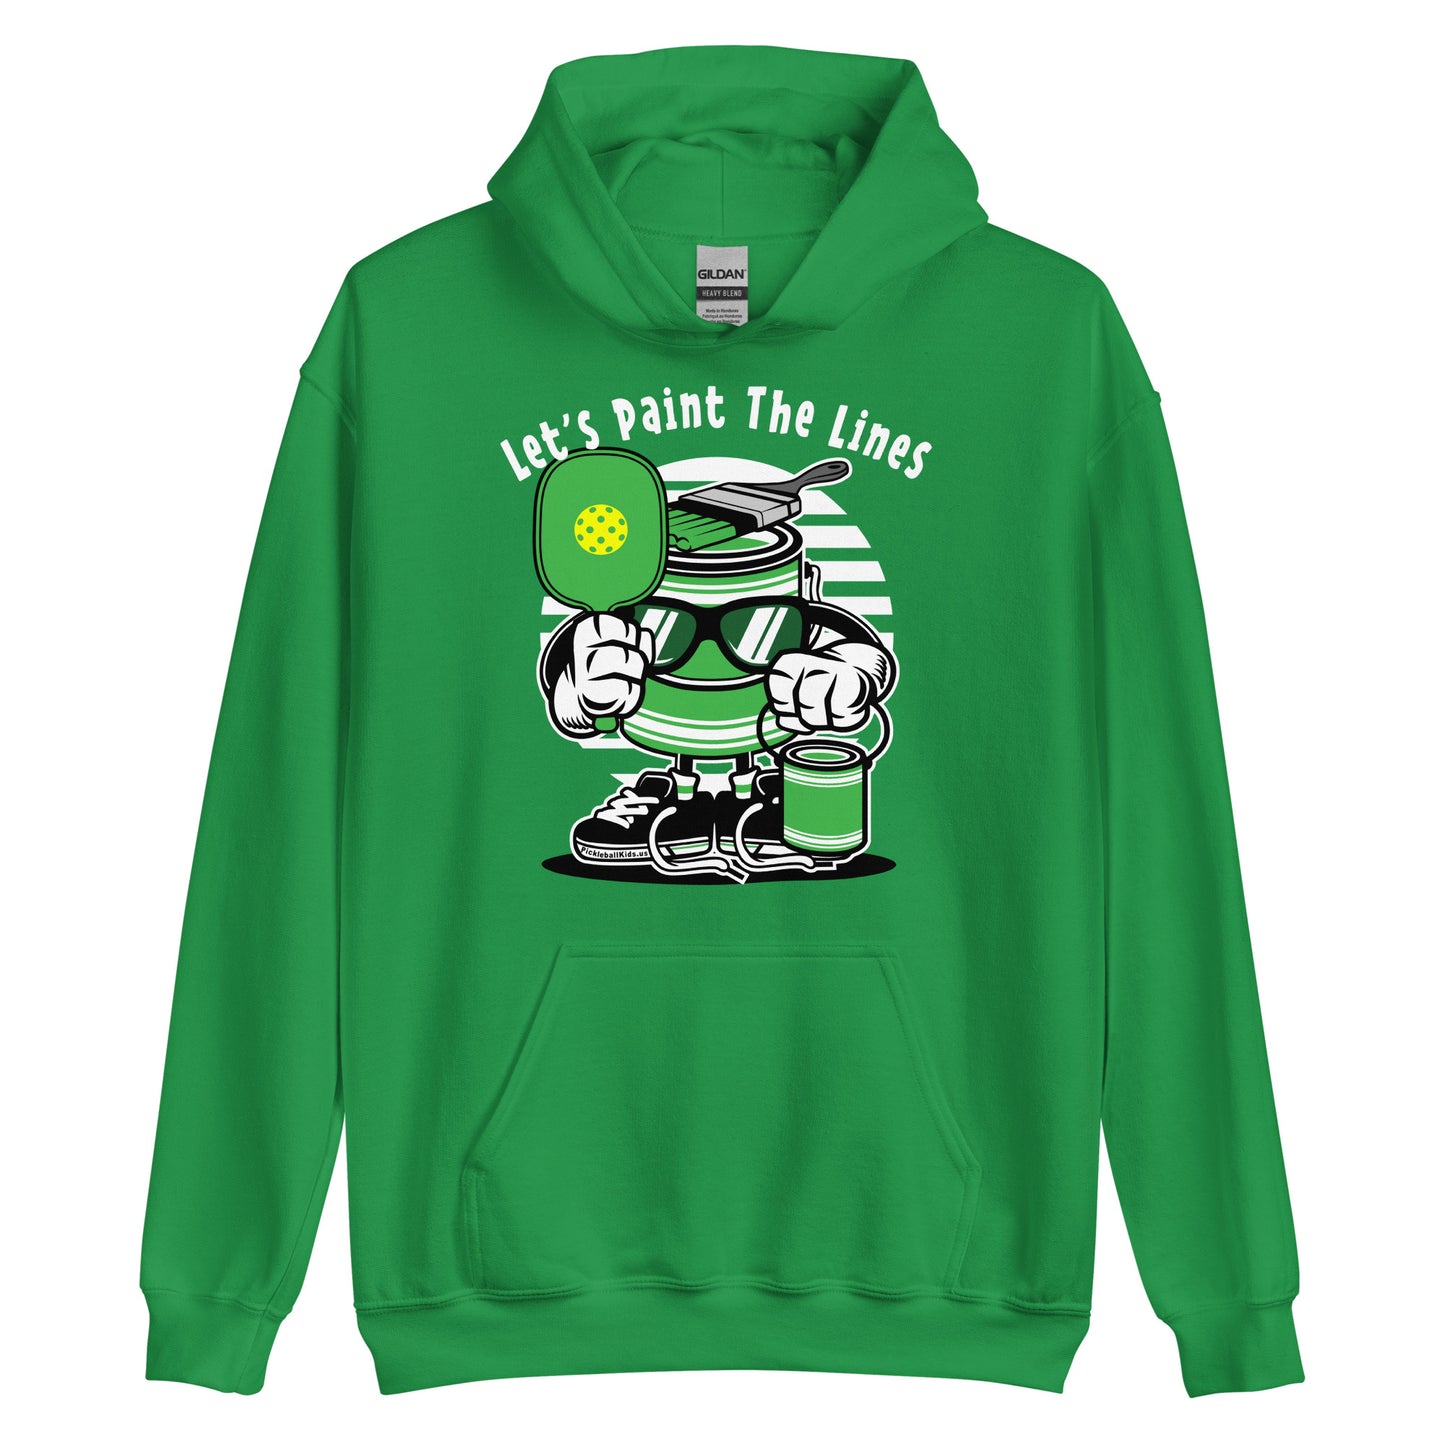 Fun Pickleball Retro-Vintage Unisex Hoodie, "Let's Paint The Line", Can And Brush Holding Paddle